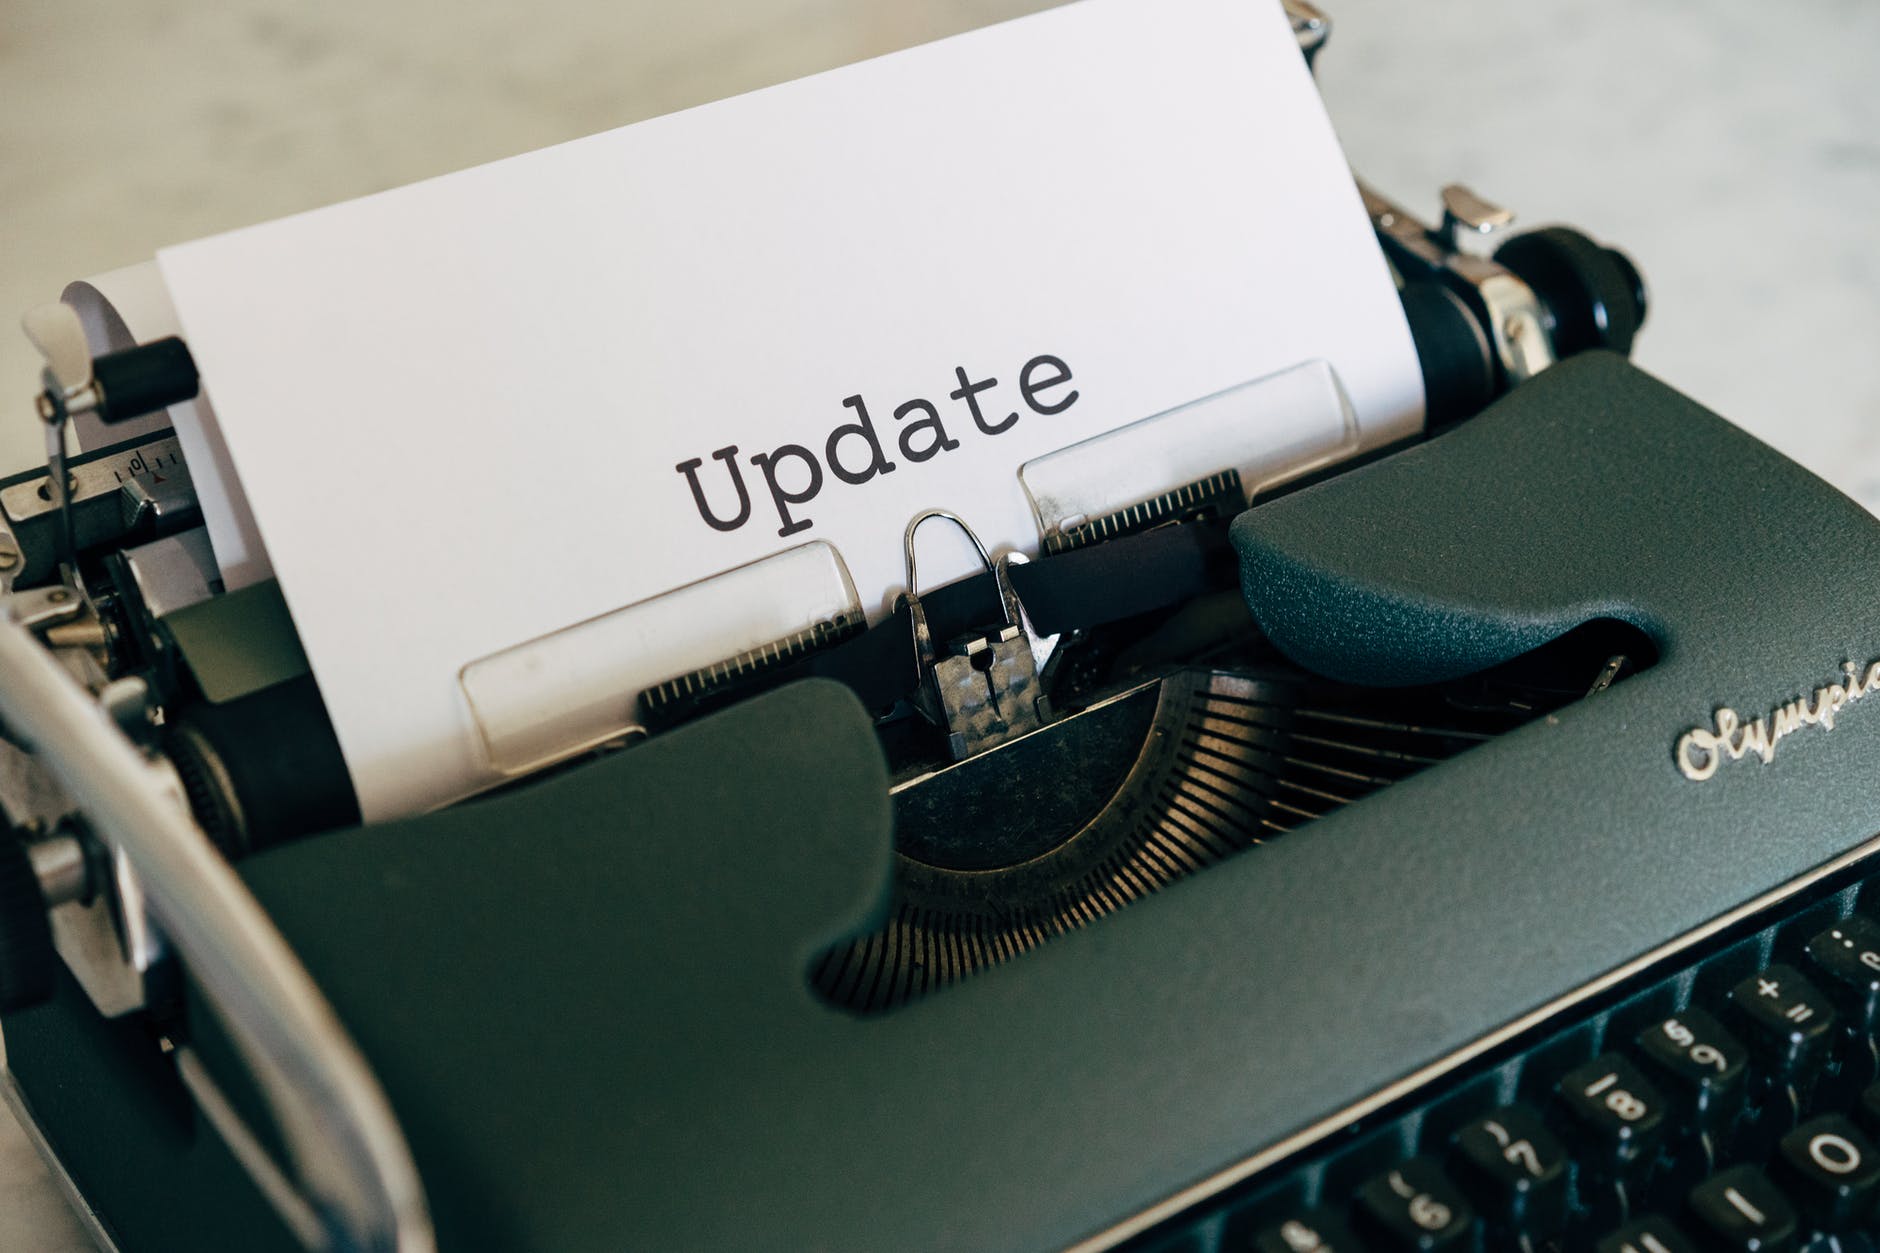 Typewriter with paper that says "Update." Photo by Markus Winkler on Pexels.com.